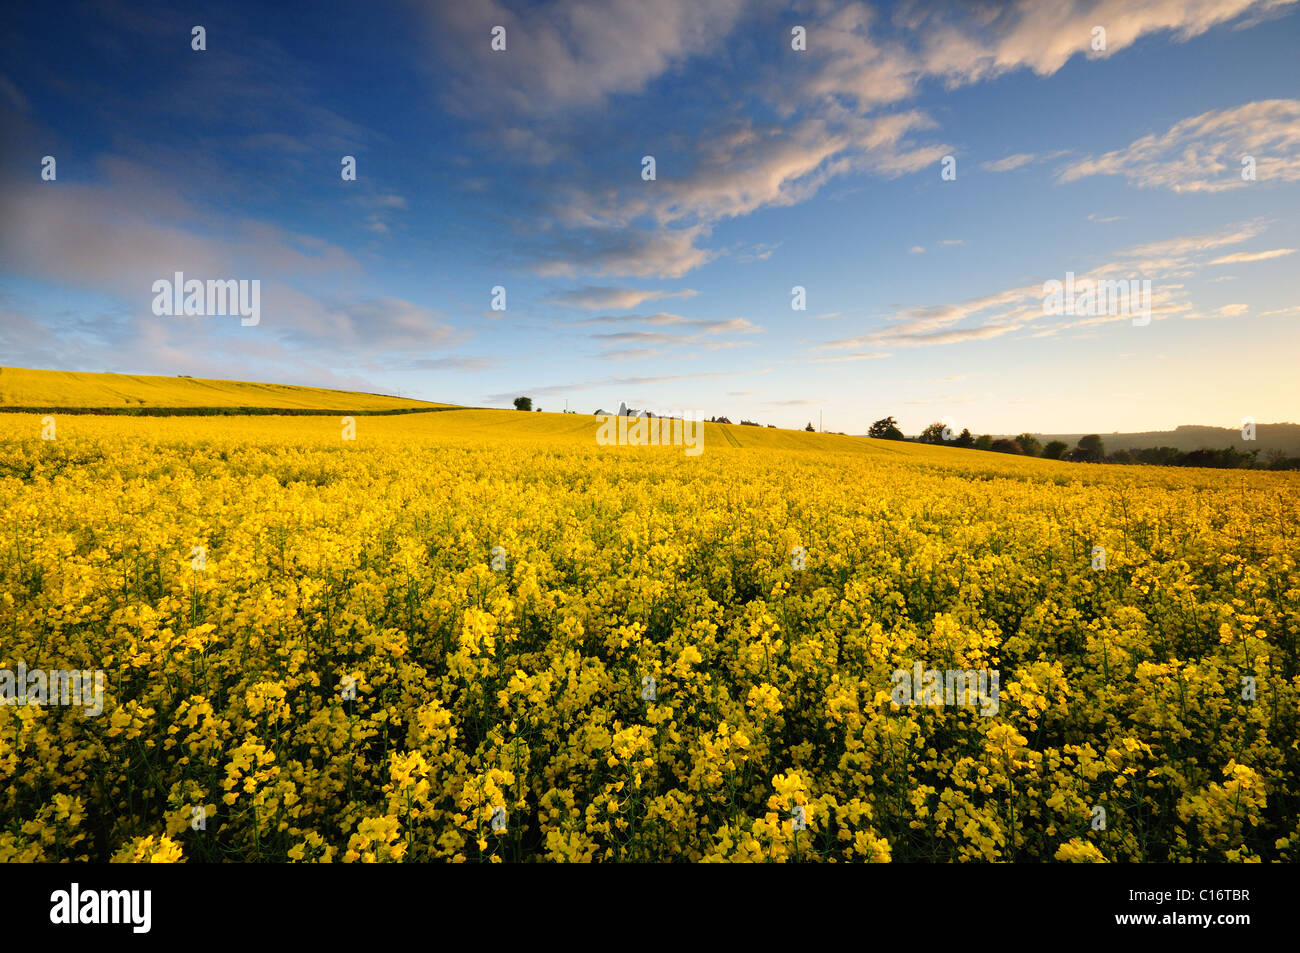 A conola (Brassica napus) or rapeseed field at sunset. Stock Photo